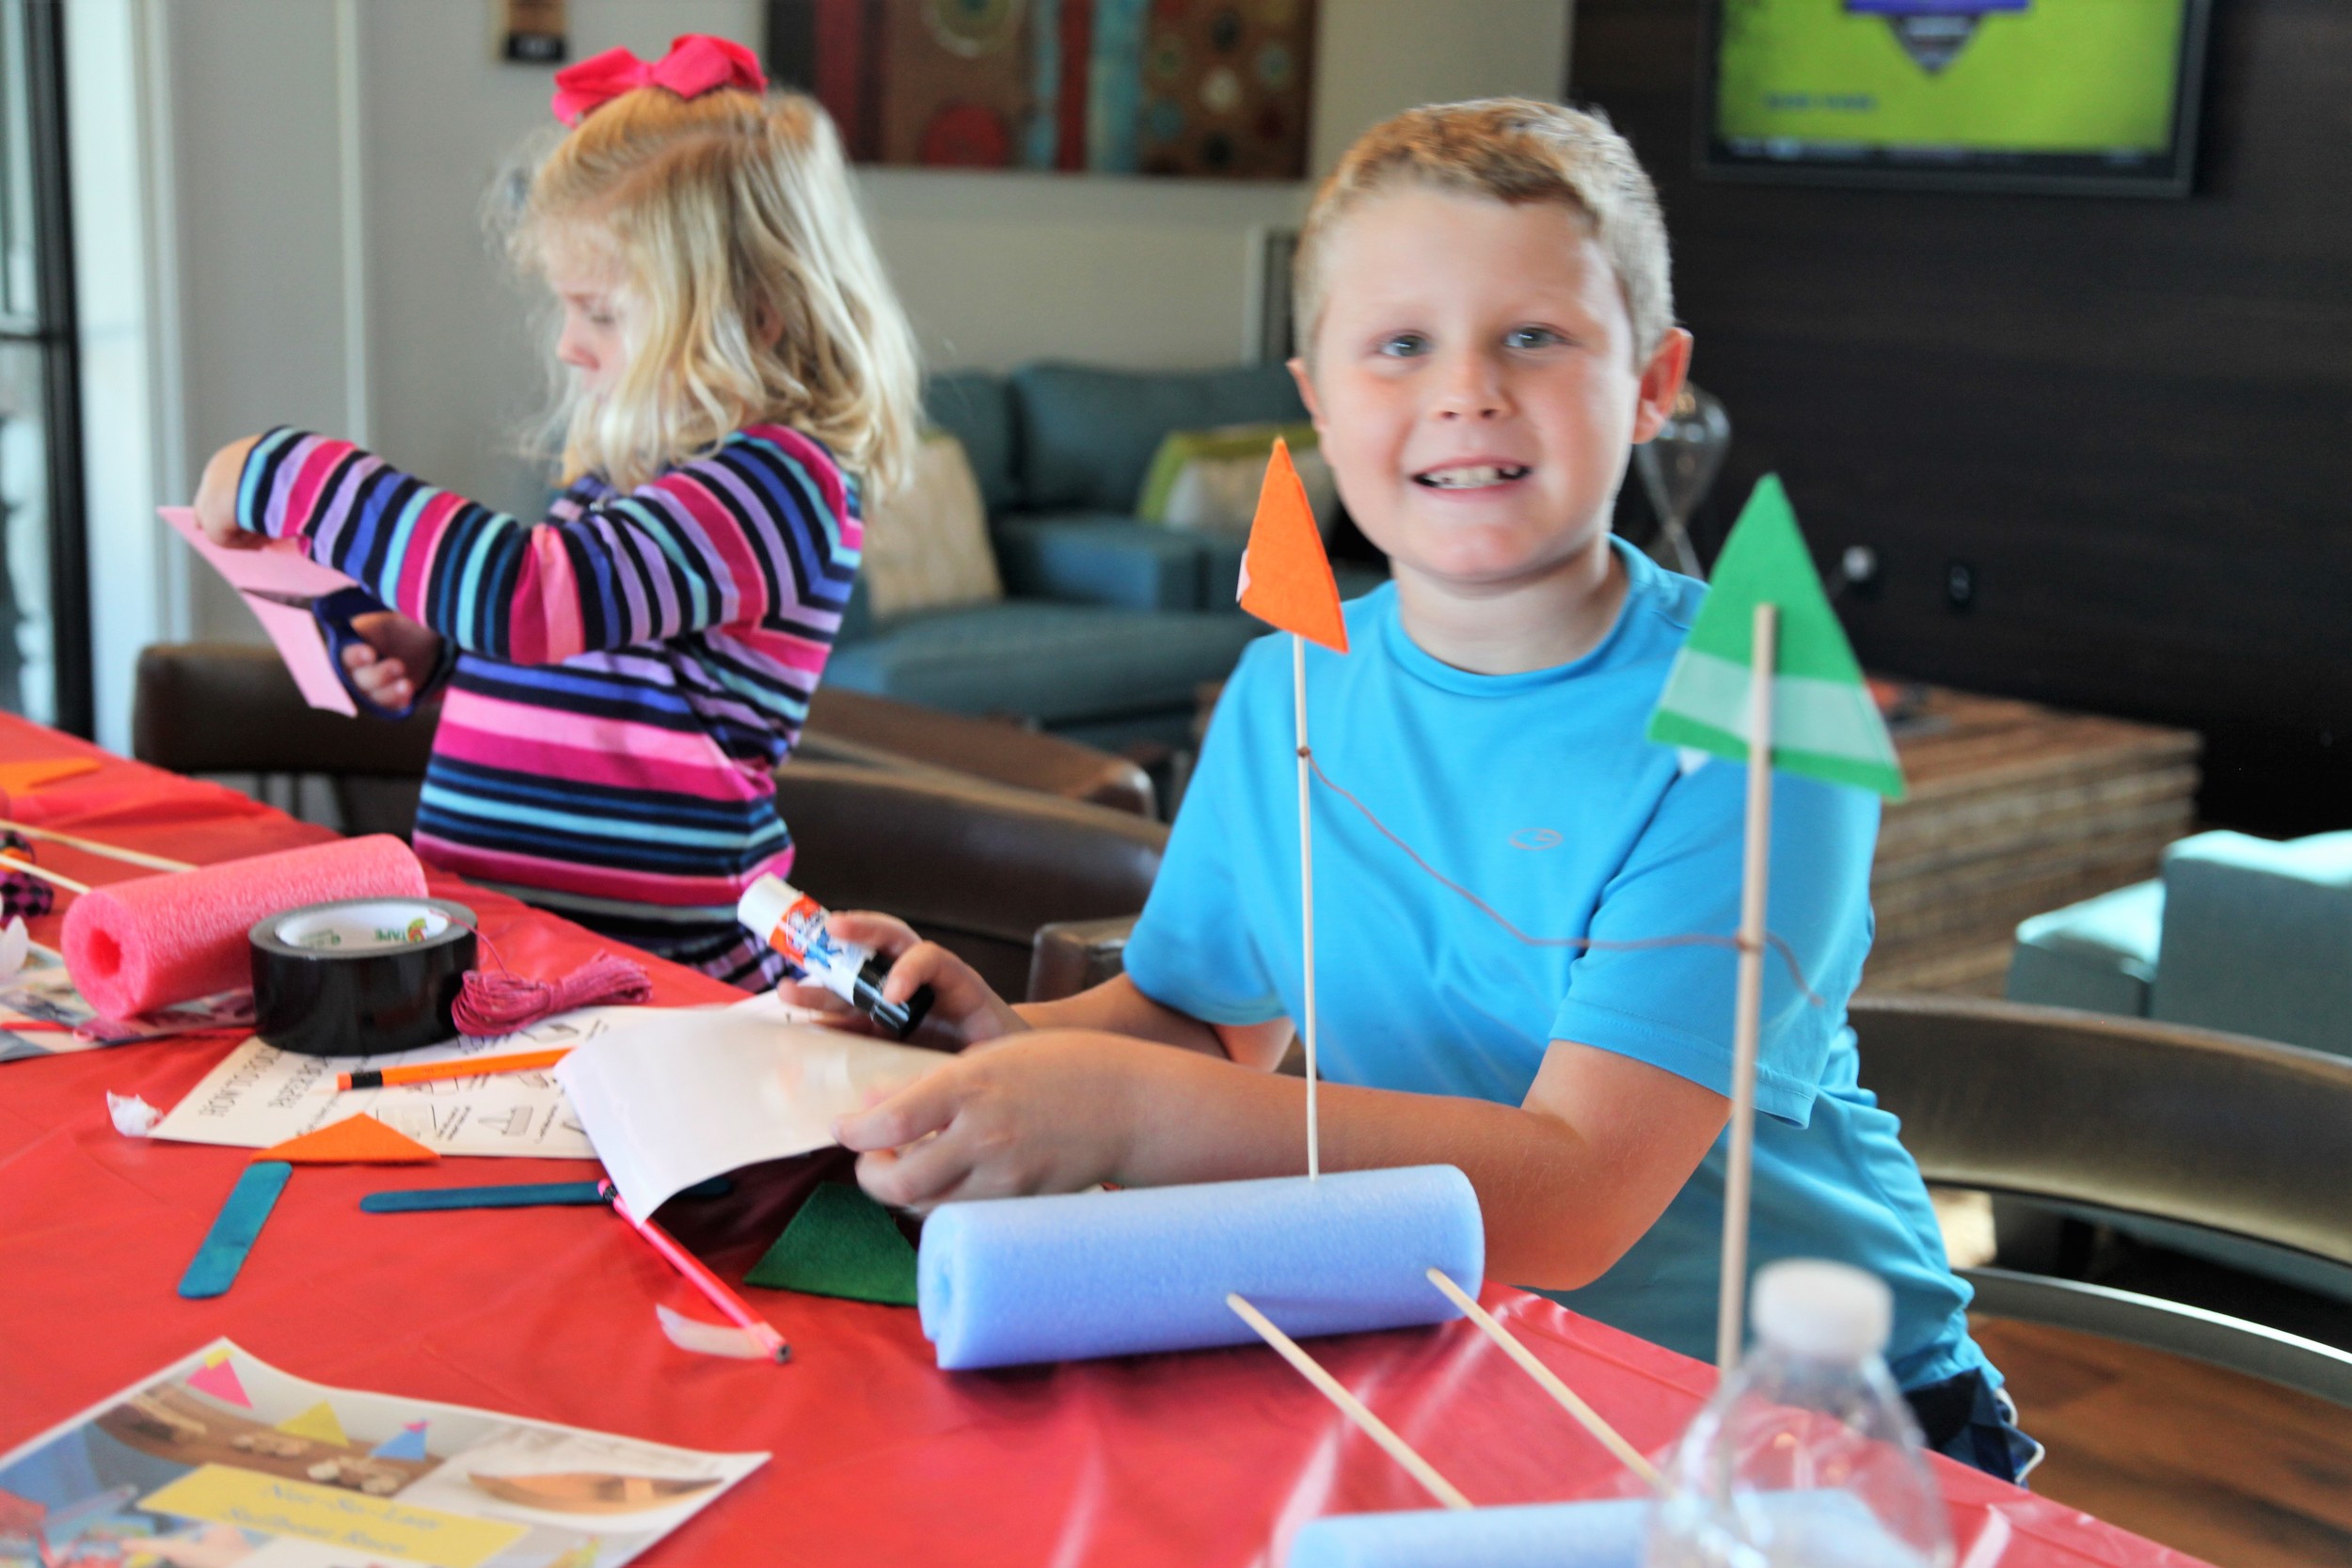 Shearwater kids and parents construct sailboats out of Styrofoam, sticks and other materials.